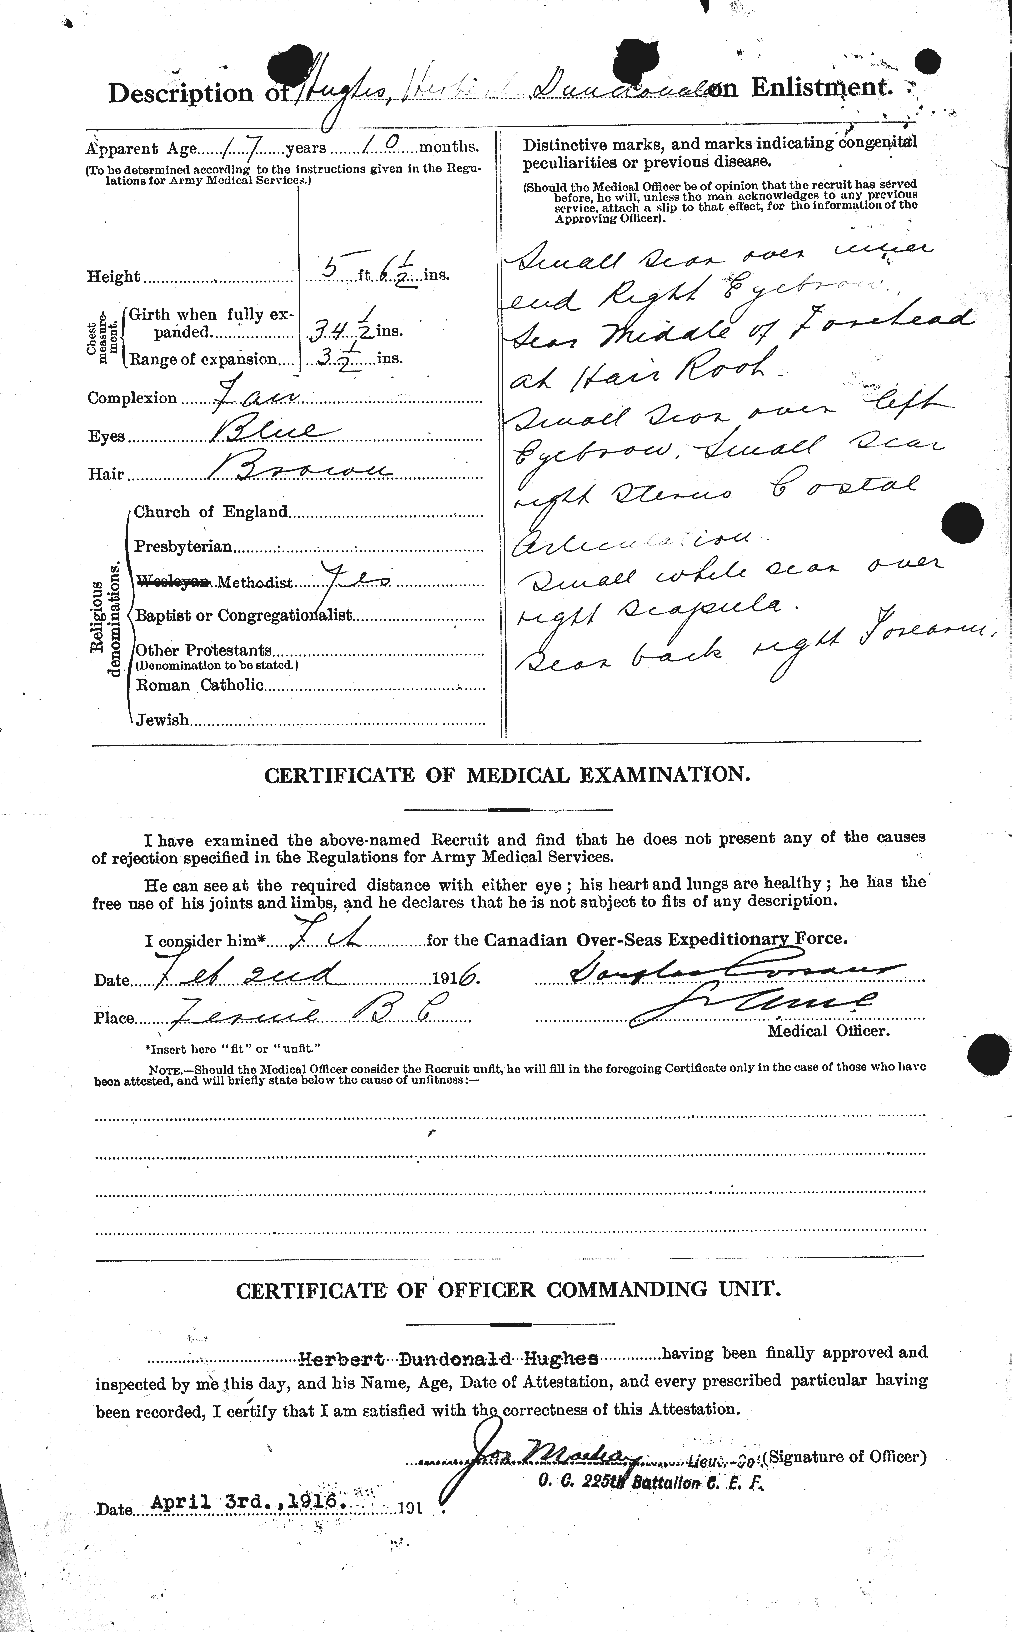 Personnel Records of the First World War - CEF 403897b